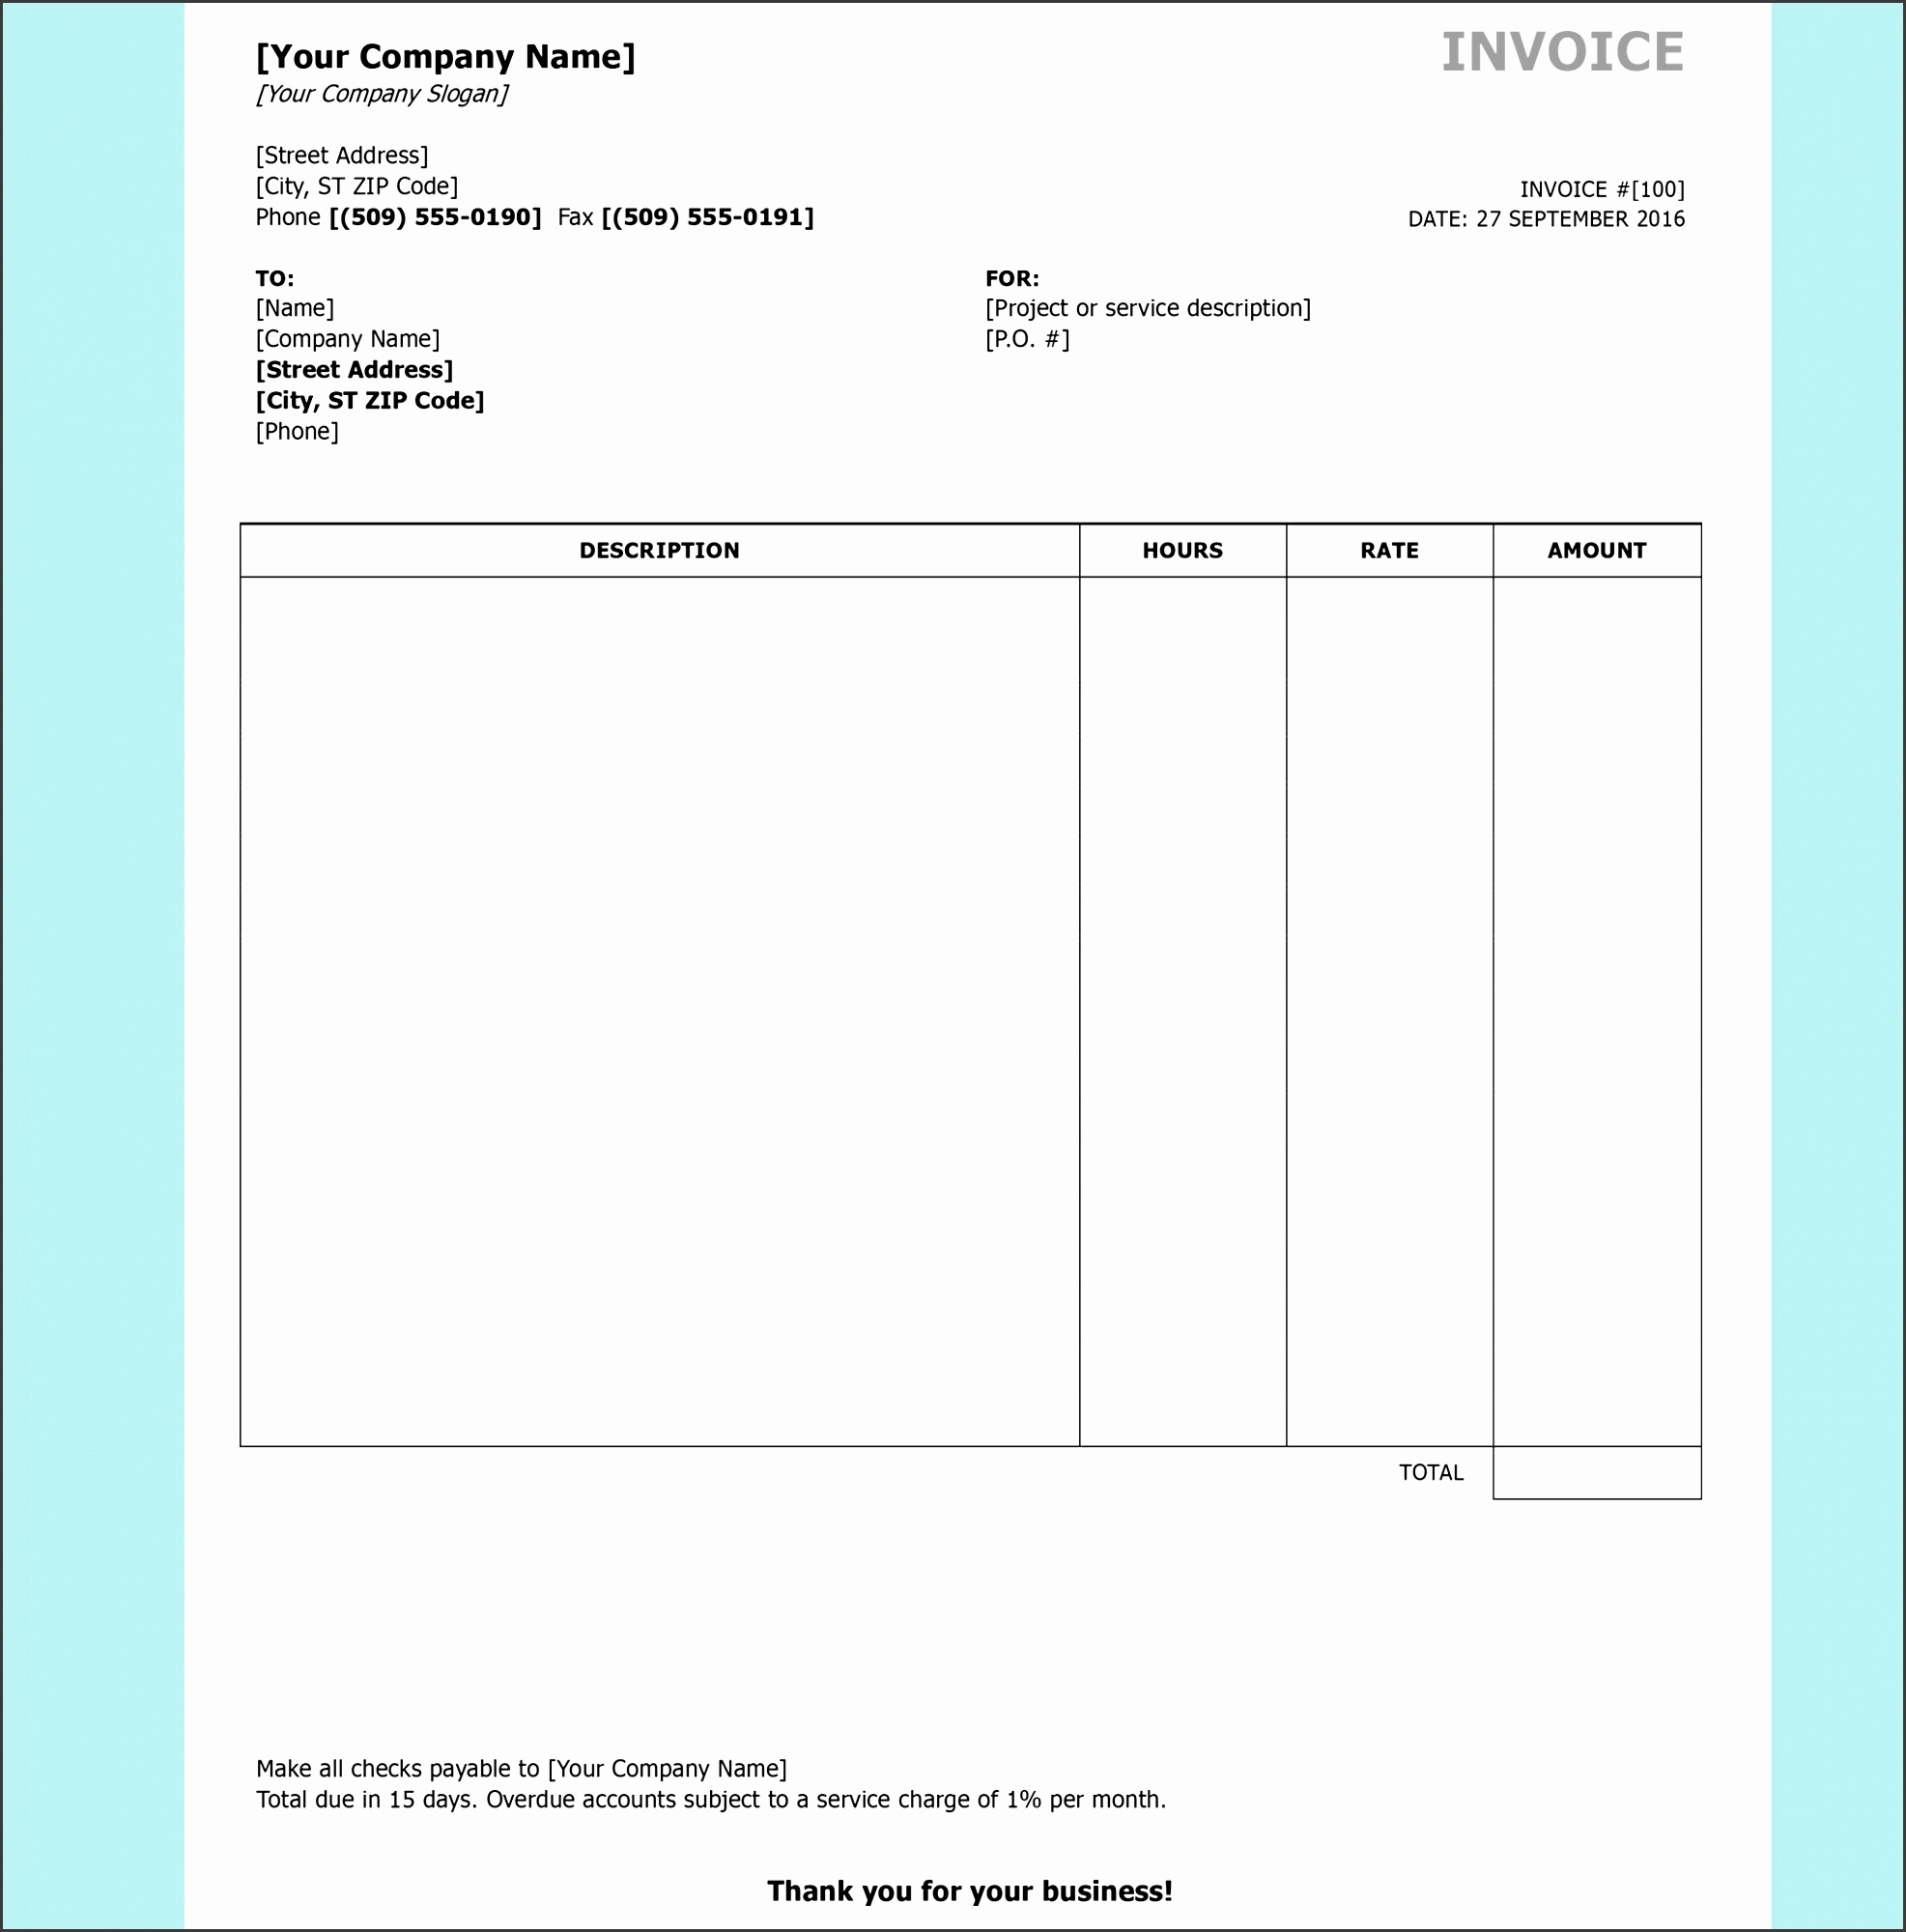 free invoice thevictorianparlor co forms pdf 10 openoffice invoiceberry tem free invoice forms form full